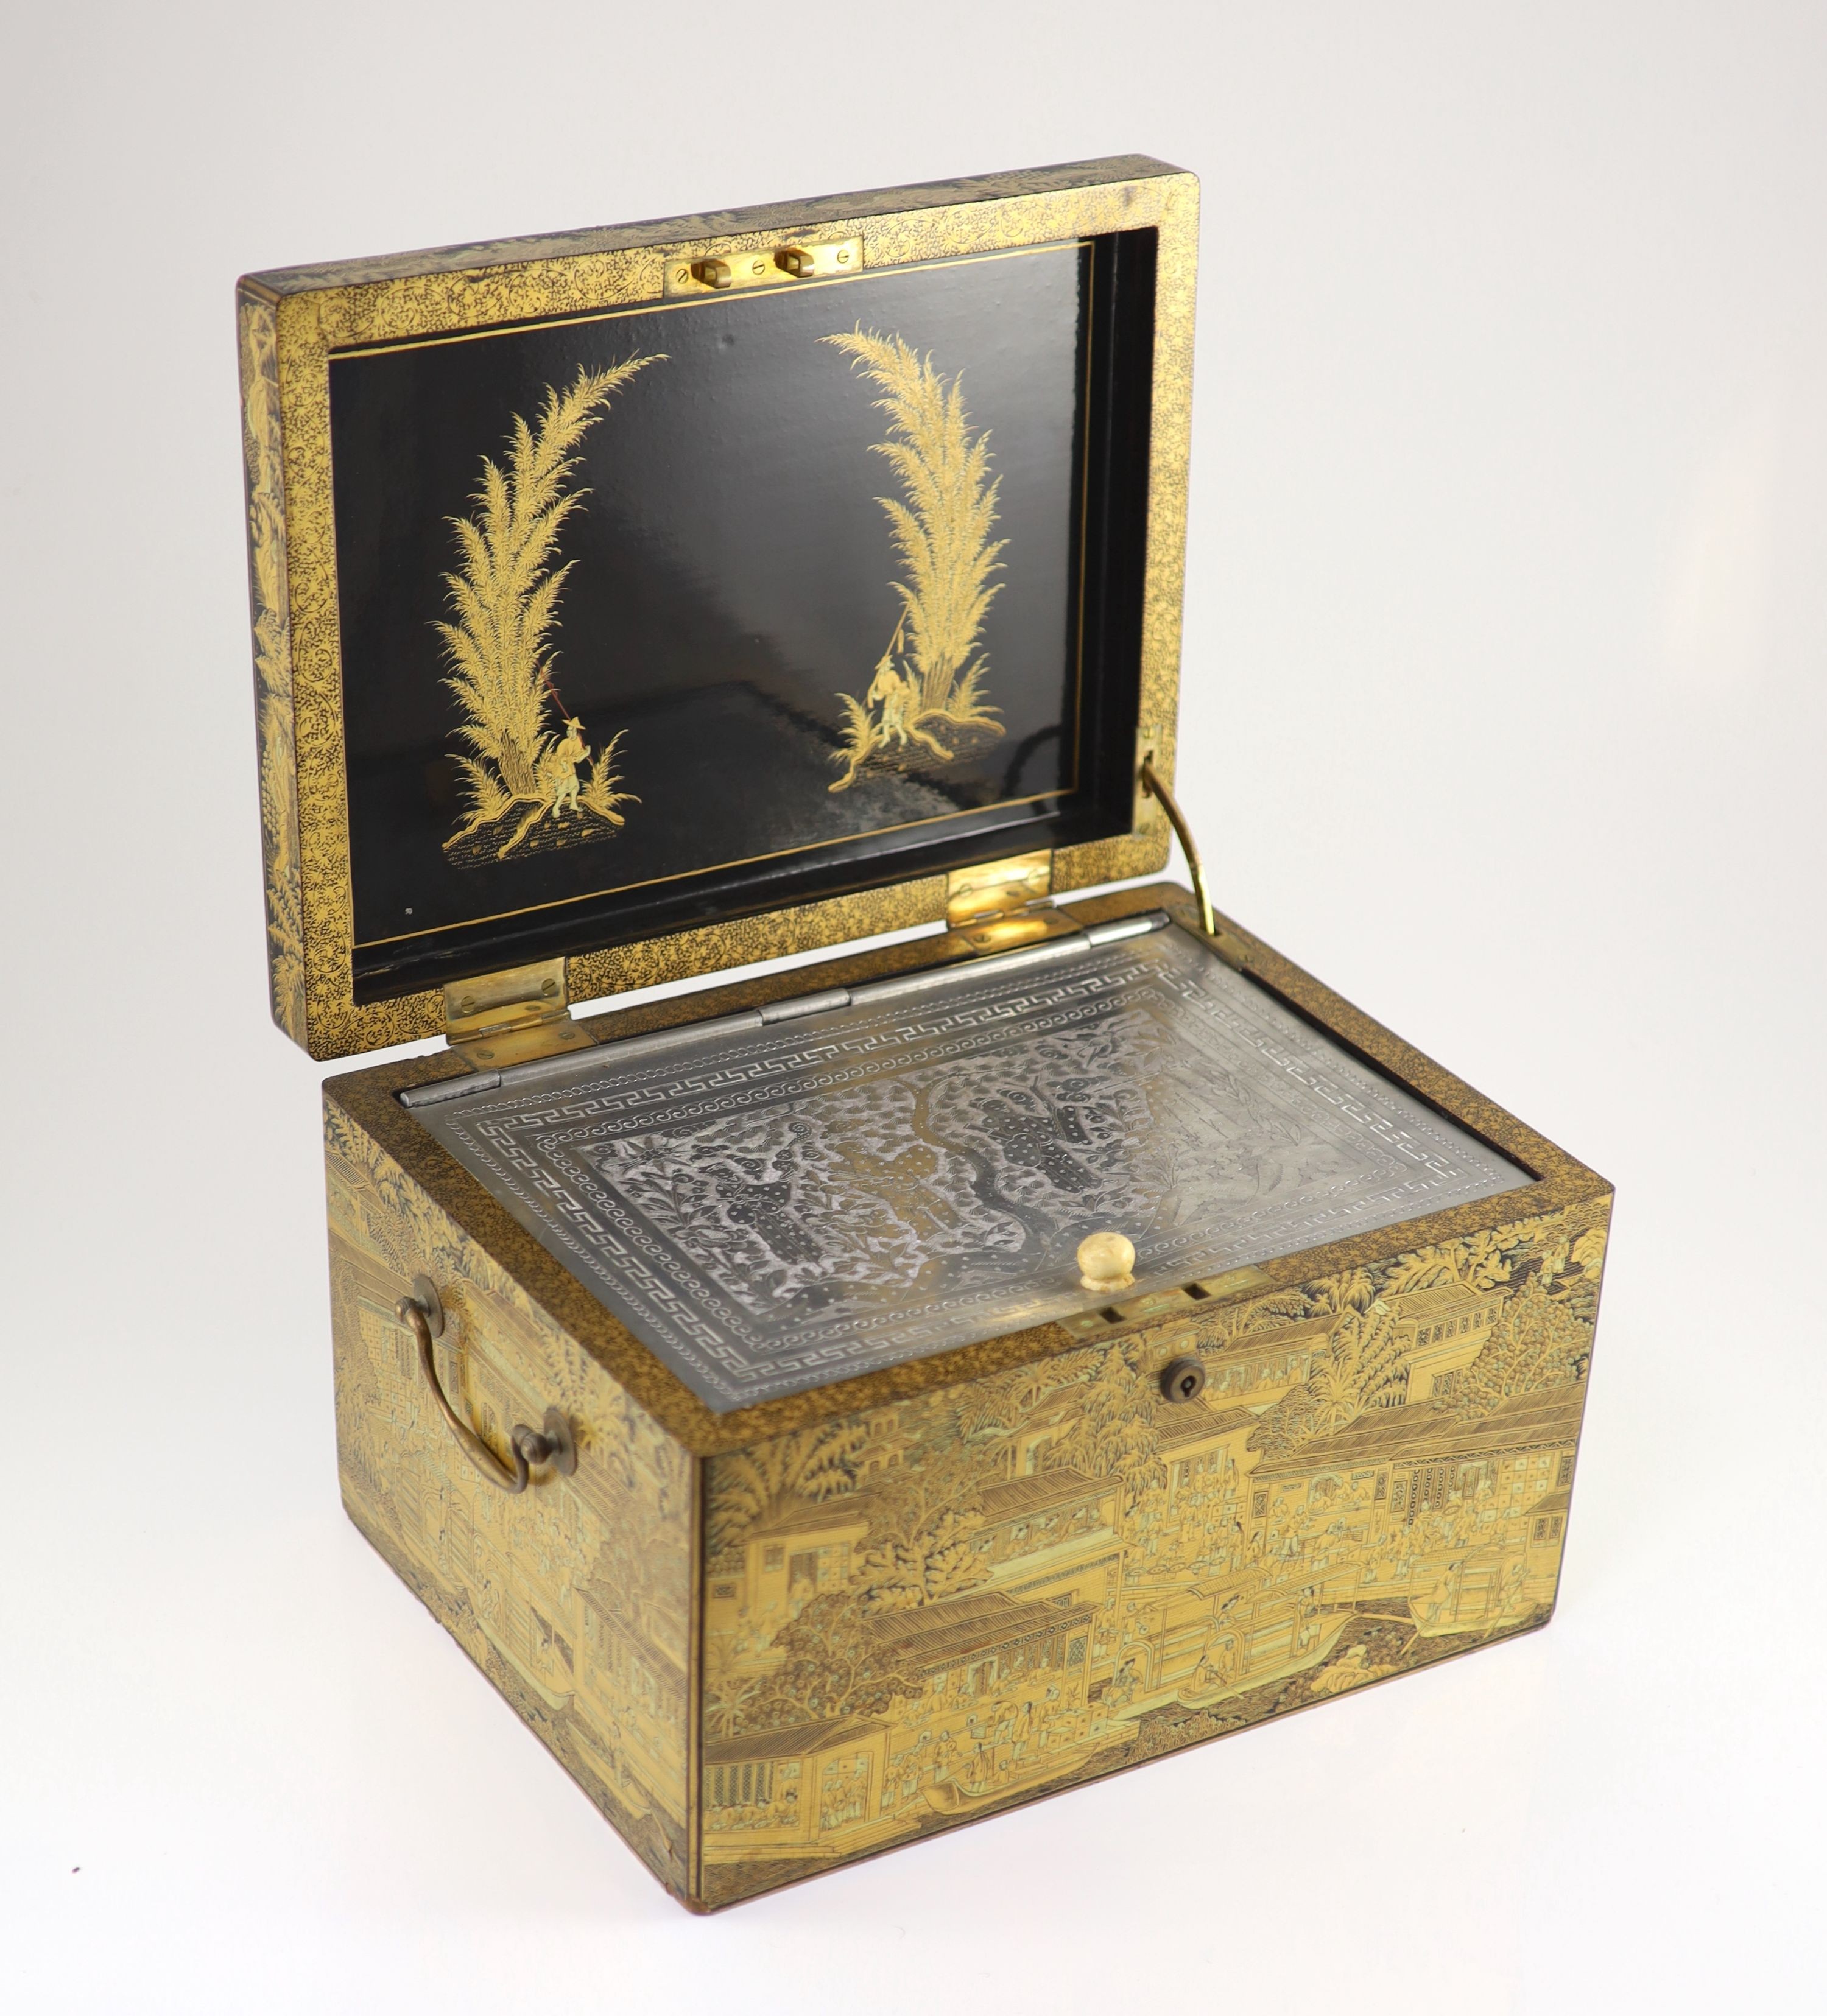 A Chinese export gilt decorated black lacquer tea chest, early 19th century,typically decorated with - Image 7 of 10